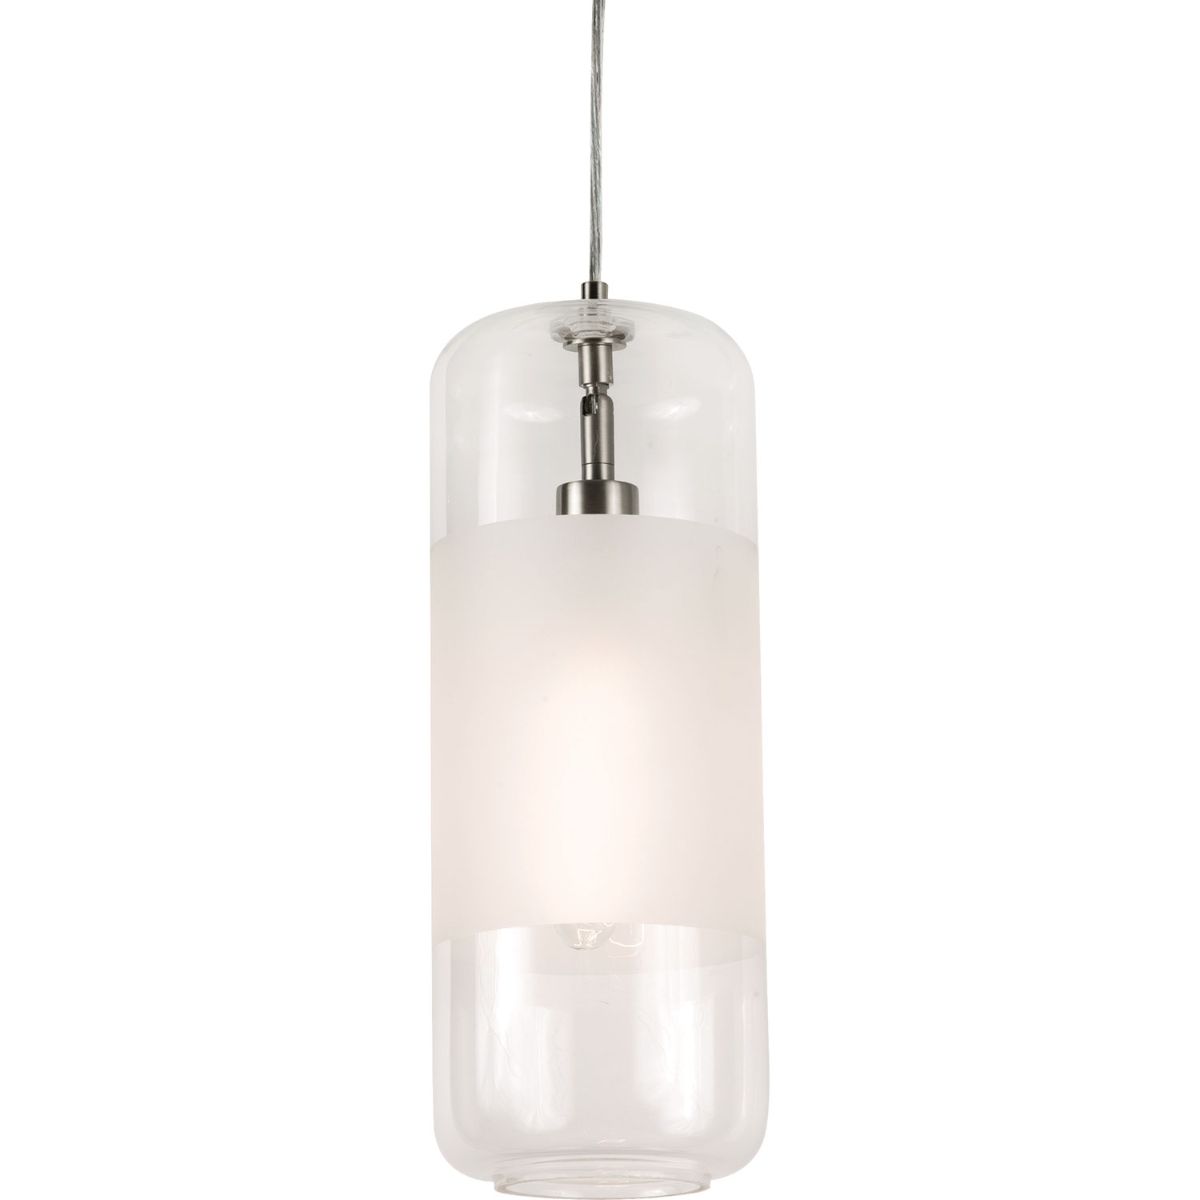 Hermosa 6 in. Pendant Light Satin Nickel finish with Clear shade